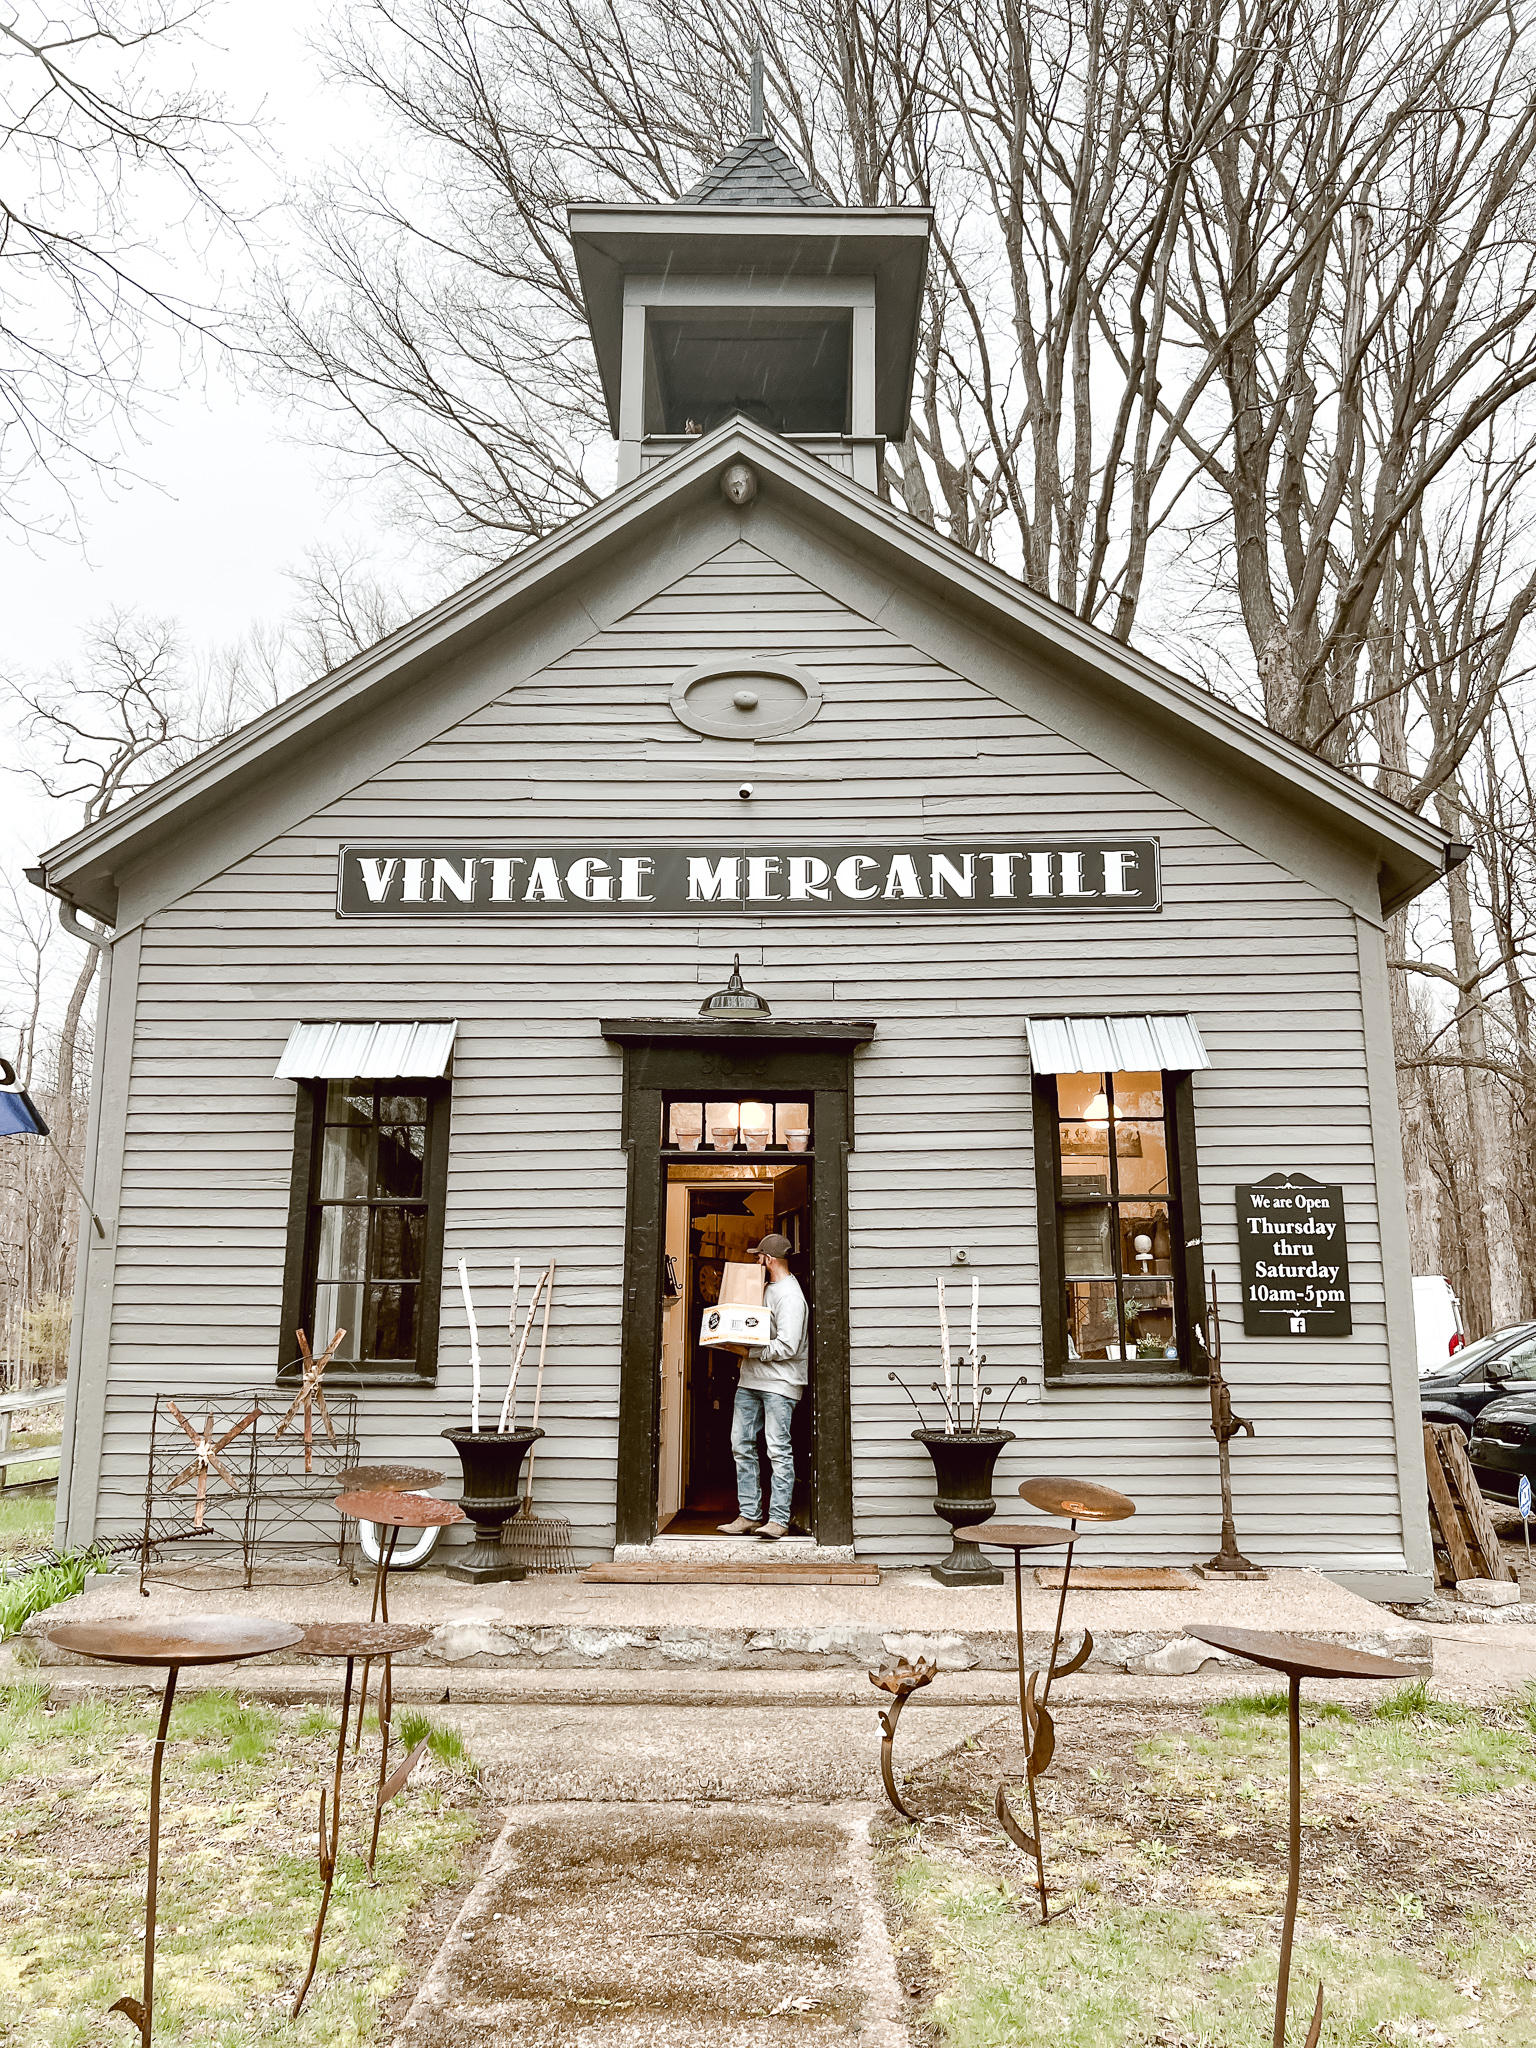 Weekend Antique Finds: Connecting with the Antique Community